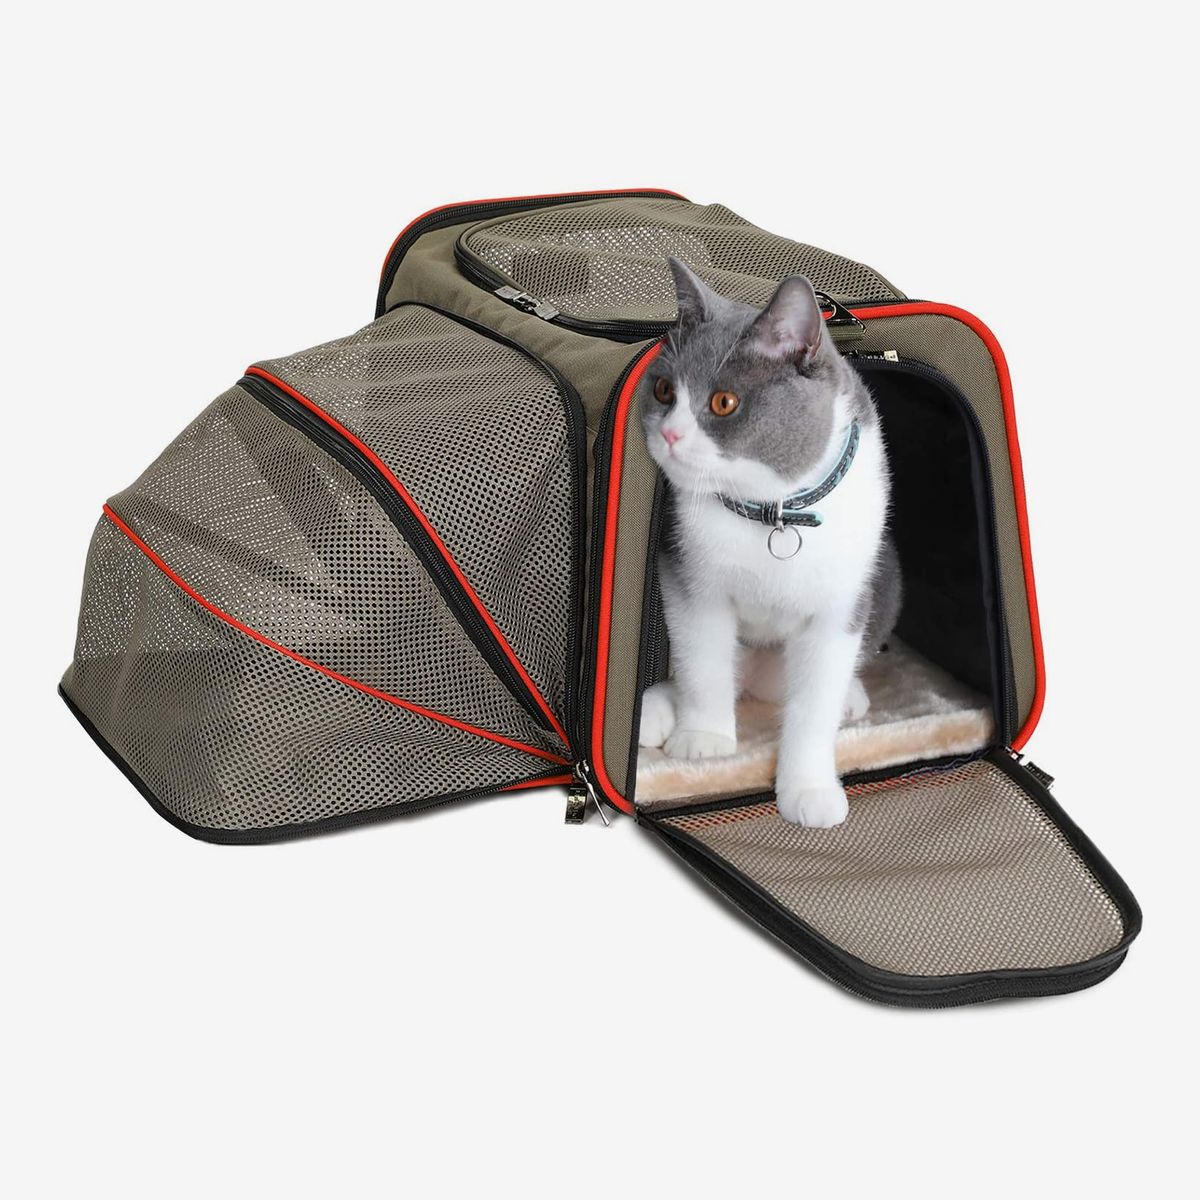 FERMAO Pet Carrier for Cats and Small Dogs Airline Approved Under The Seat Cat Travel Carrier 